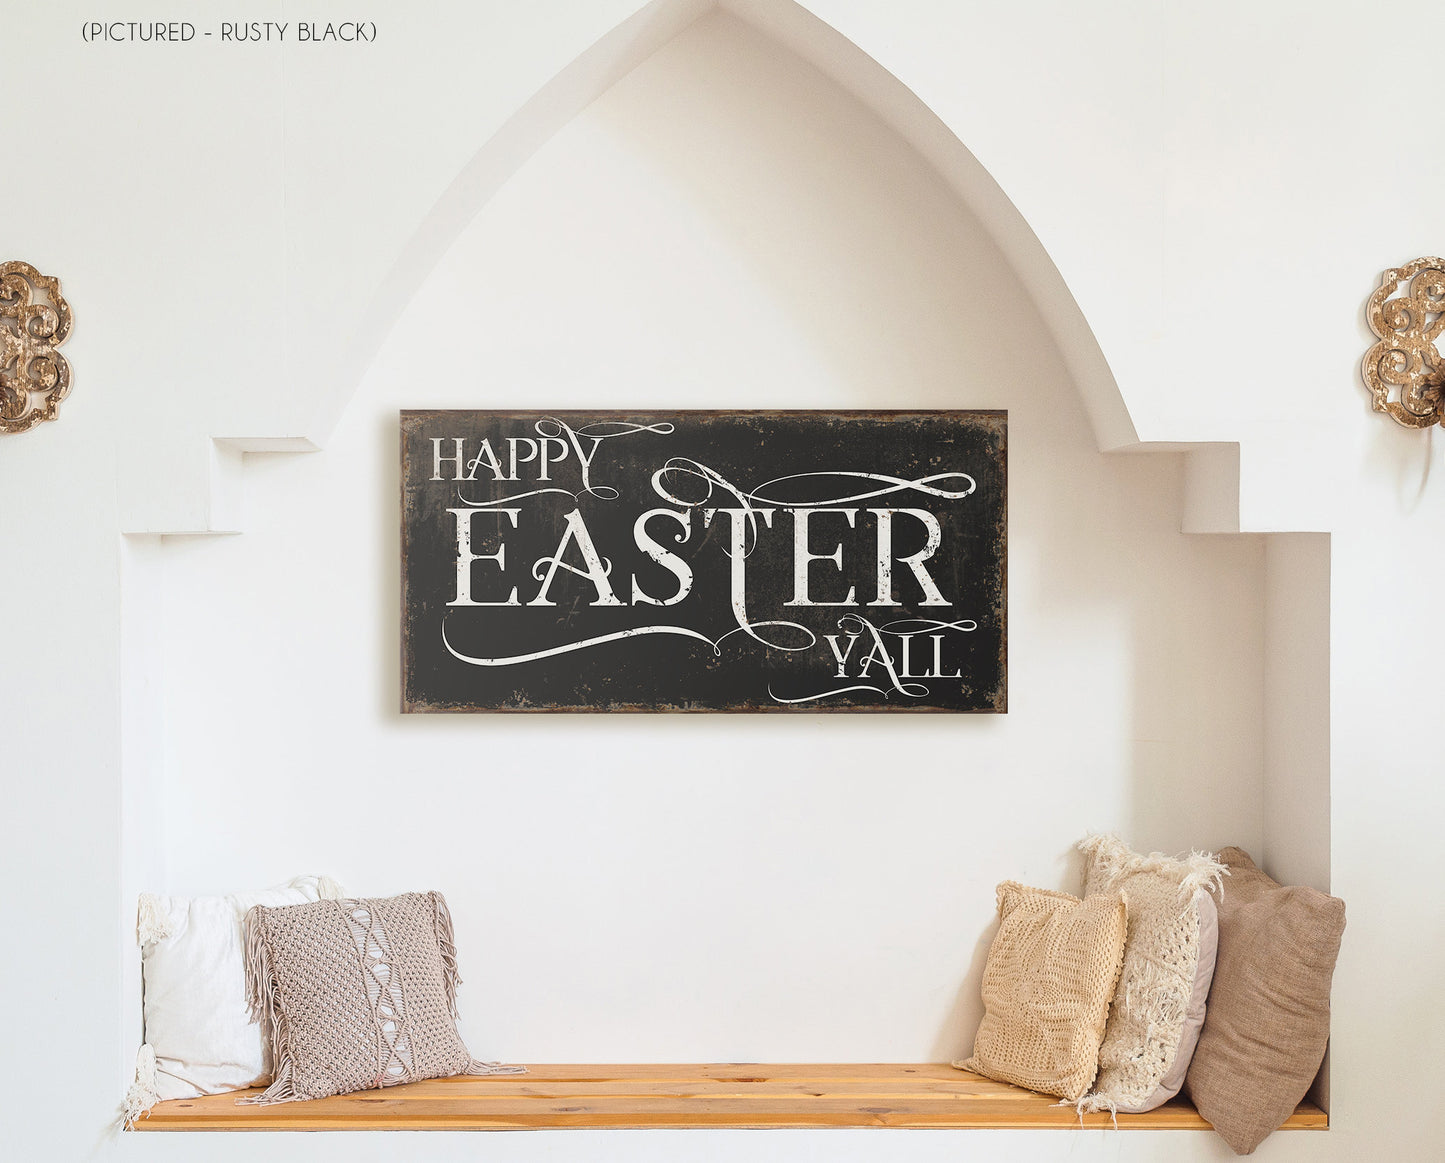 HAPPY EASTER YALL SIGN